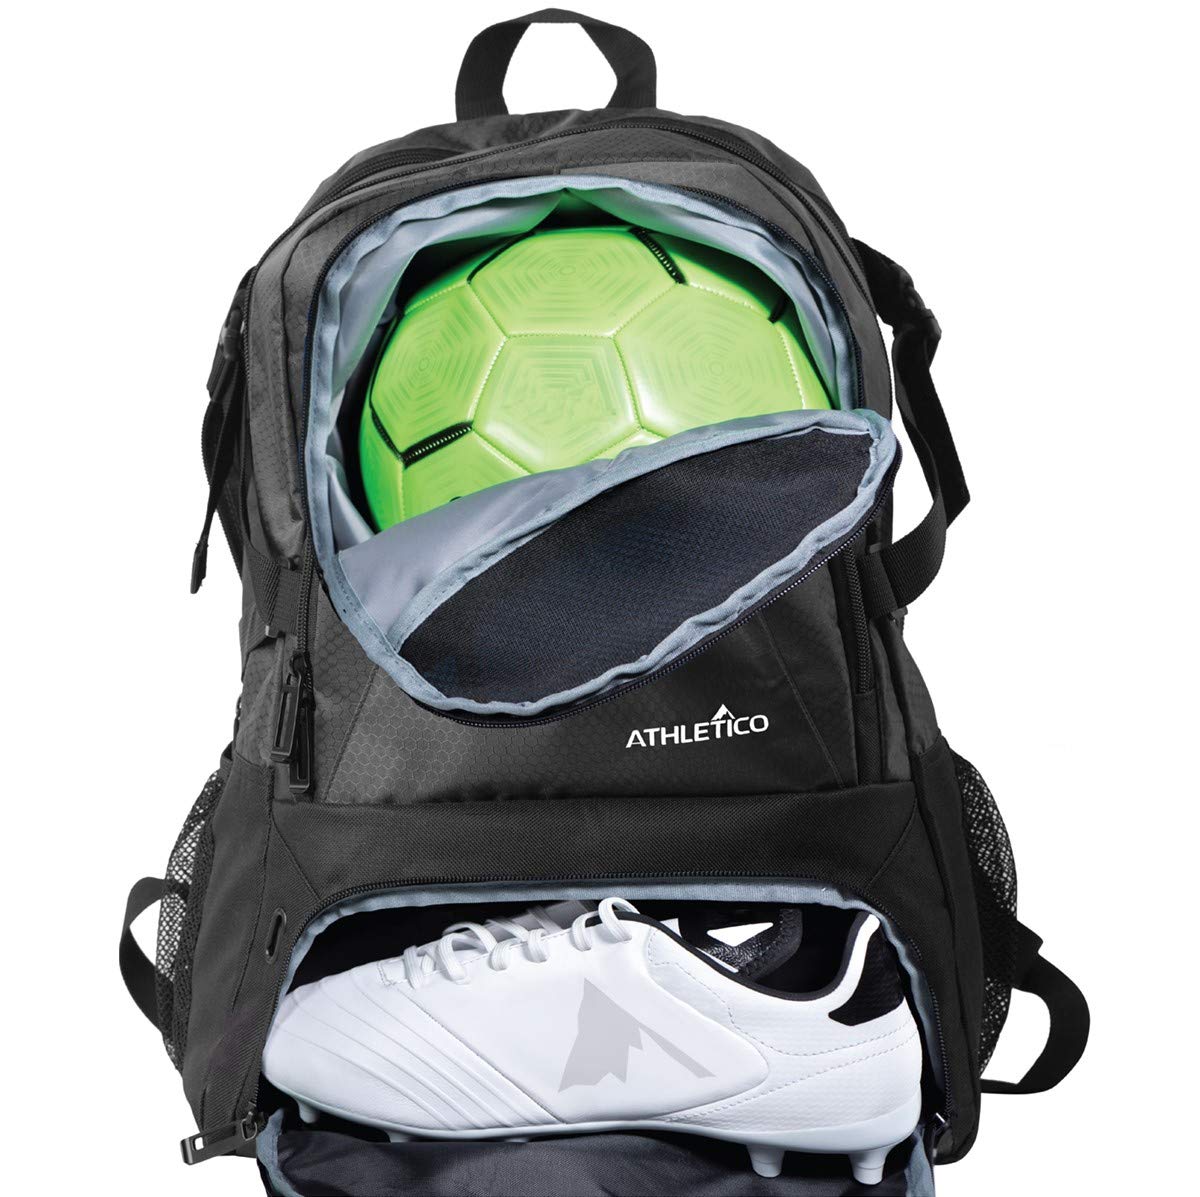 Athletico National Soccer Bag - Backpack for Soccer, Basketball & Football Includes Separate Cleat and Ball Holder  - Very Good